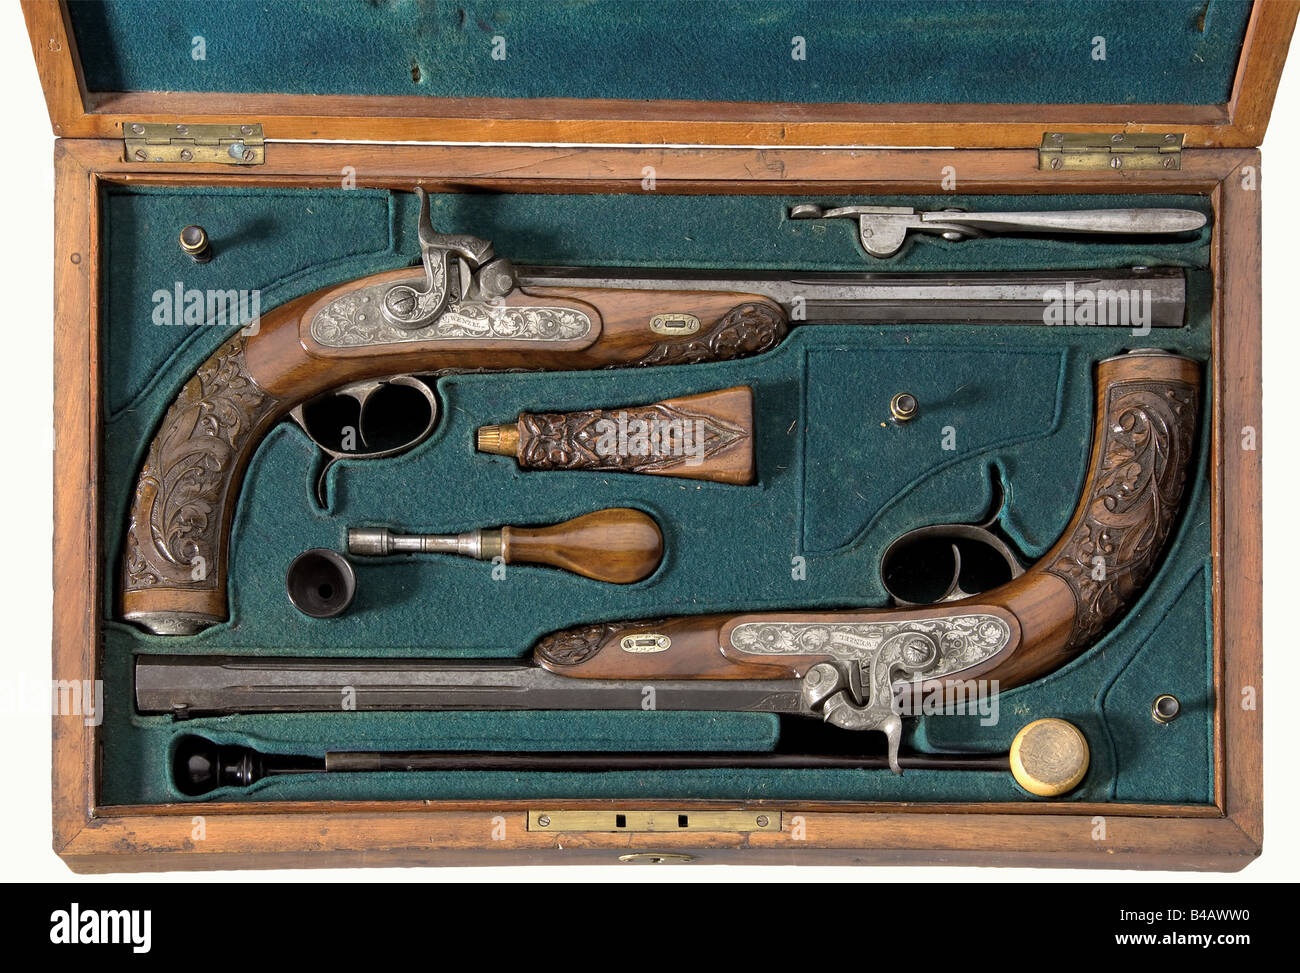 A cased pair of percussion pistols, V. Wenzel, Znaim (=Znojmo) Czechoslovakia. Octagonal, fluted barrels with patent breeches and smooth bores in 9.5 mm calibre. Dovetailed front sights. The tops of the barrels bear floral engraving and each has the signature 'V. WENZEL ZNAIM' as well as the inscription '1' or '2' respectively in gold. Percussion locks with engraved and etched floral decoration and more signatures. Beautifully carved walnut half stocks with iron furniture decorated en suite. The iron parts and blued barrels are lightly pitted or have a film of , Stock Photo